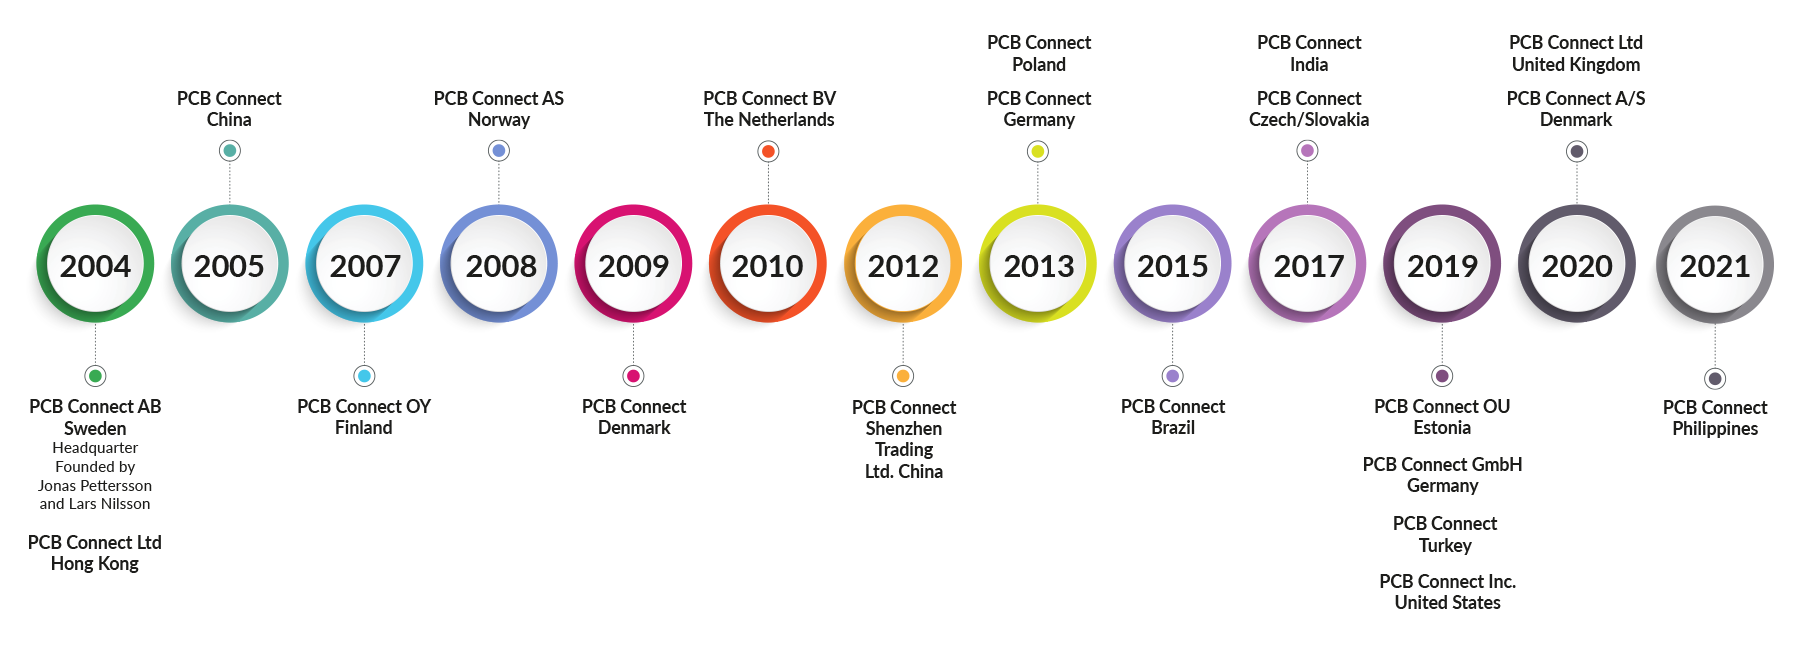 PCB Connect Timeline